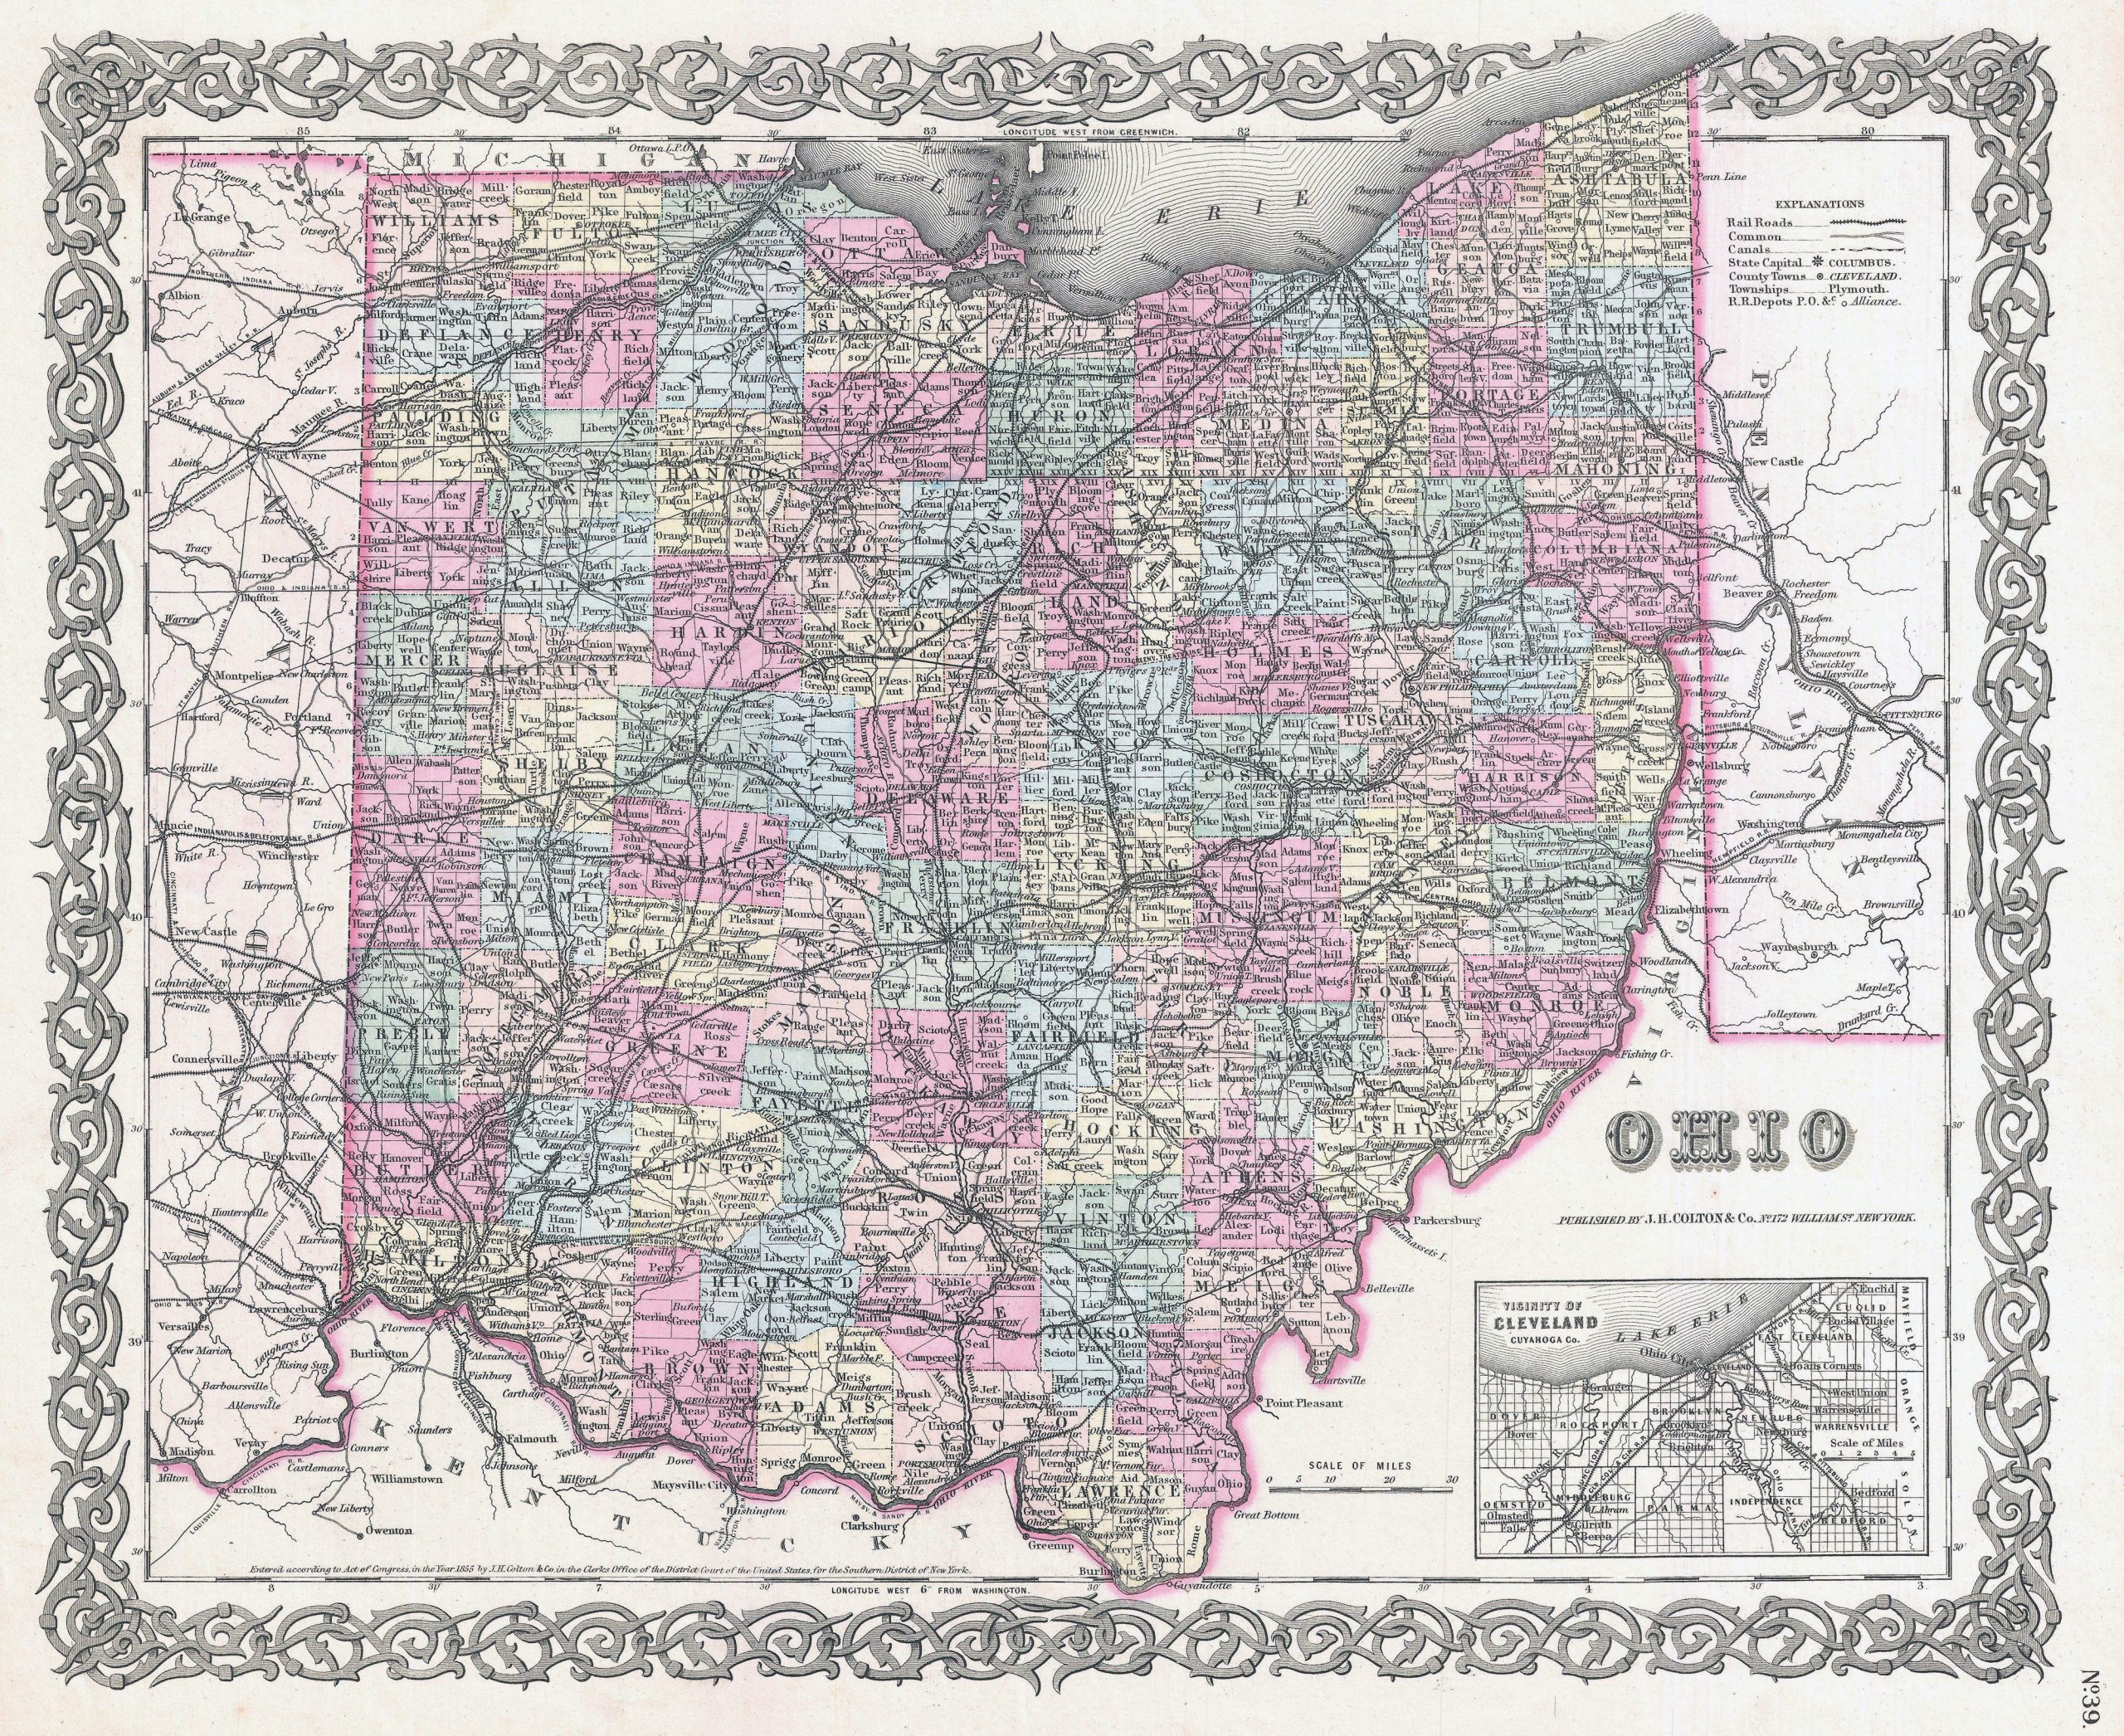 Large Detailed Old Administrative Map Of Ohio State - 1855 concernant Osu Maps